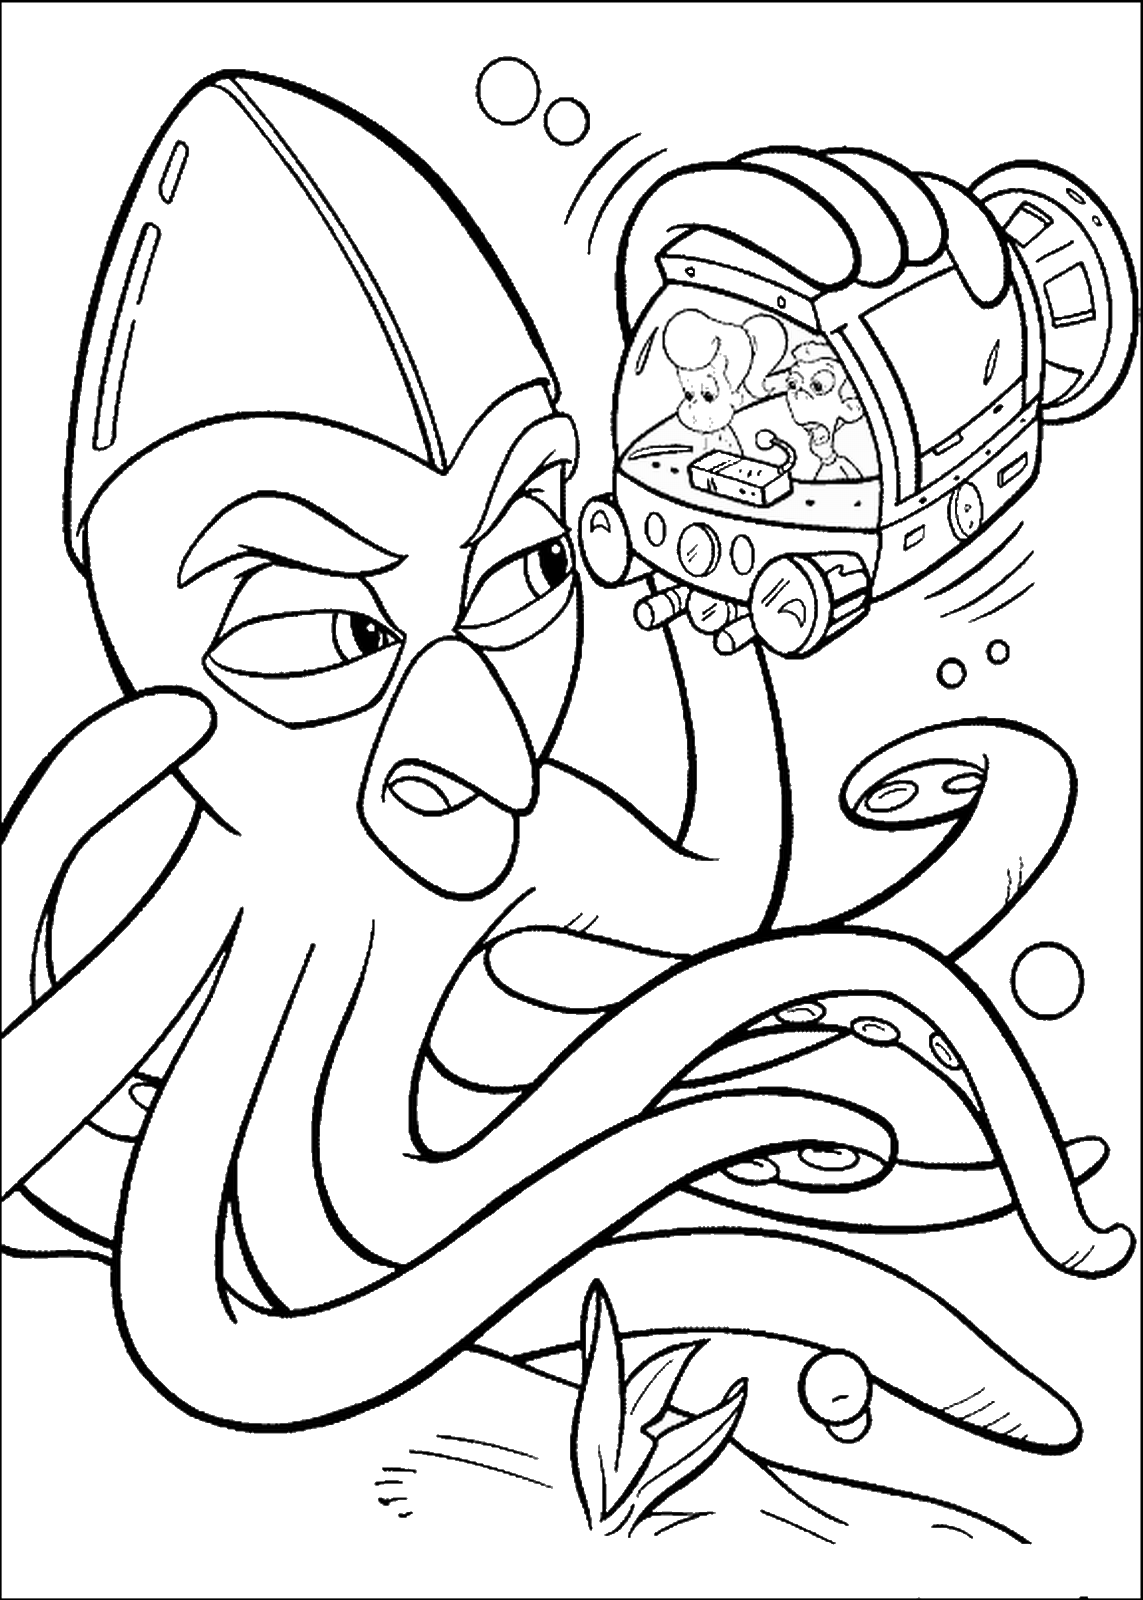 Jimmy Neutron Coloring Pages TV Film jimmy_neutron_cl19 Printable 2020 04137 Coloring4free